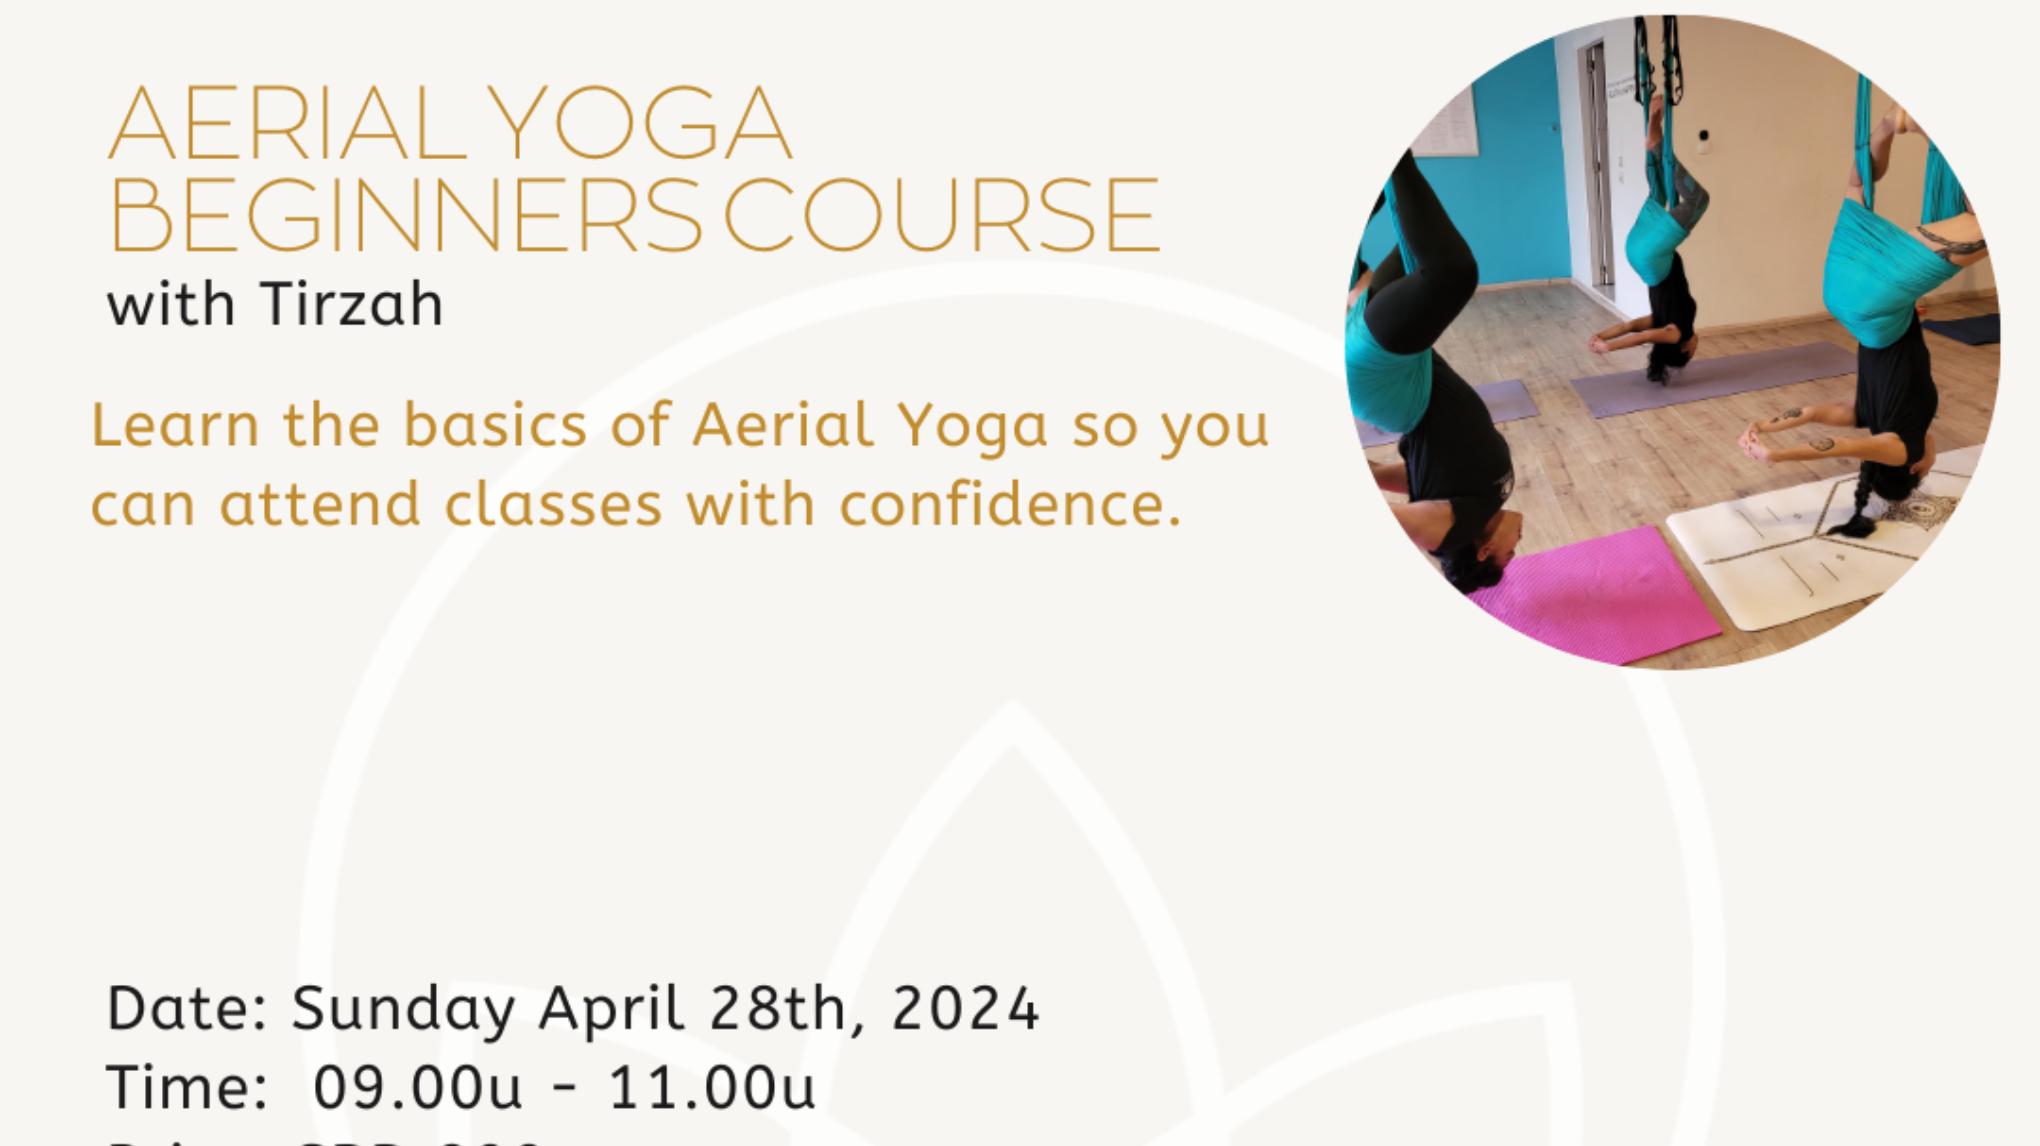 Aerial Yoga Beginners Course